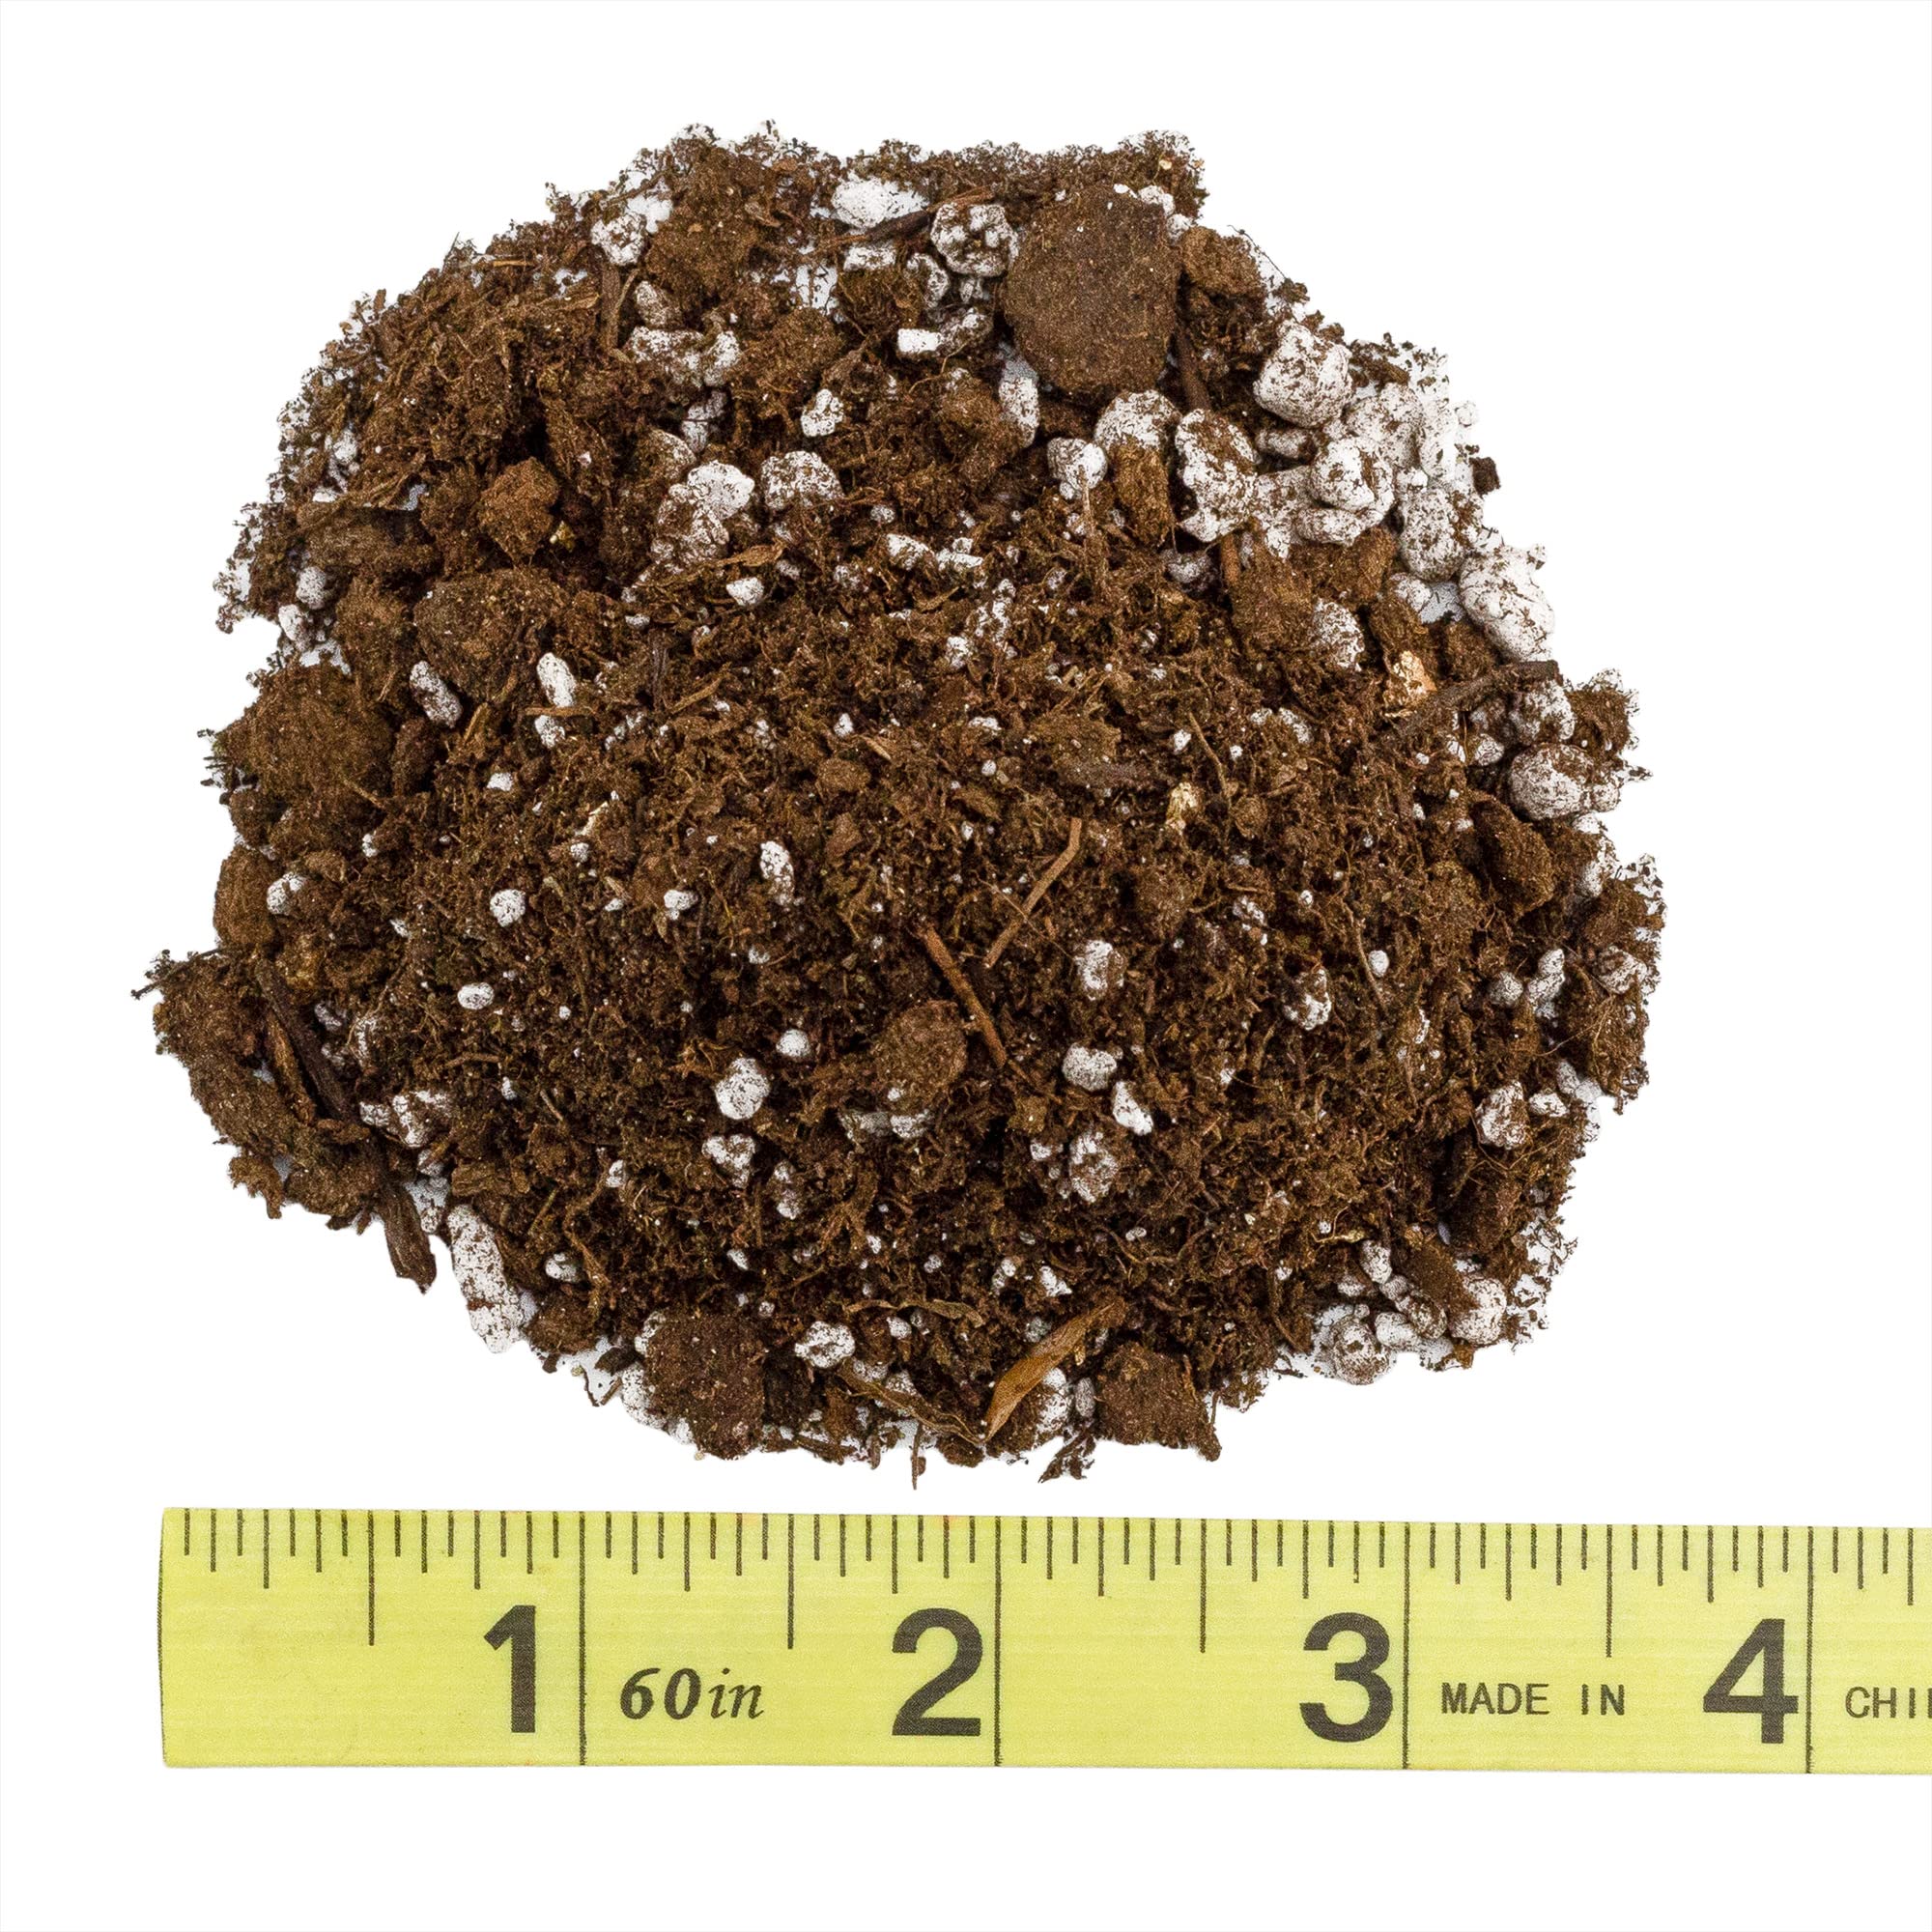 Plant Propagation Potting Mix (8 Quarts); Ideal Starter Mix for Rooting Plant Cuttings